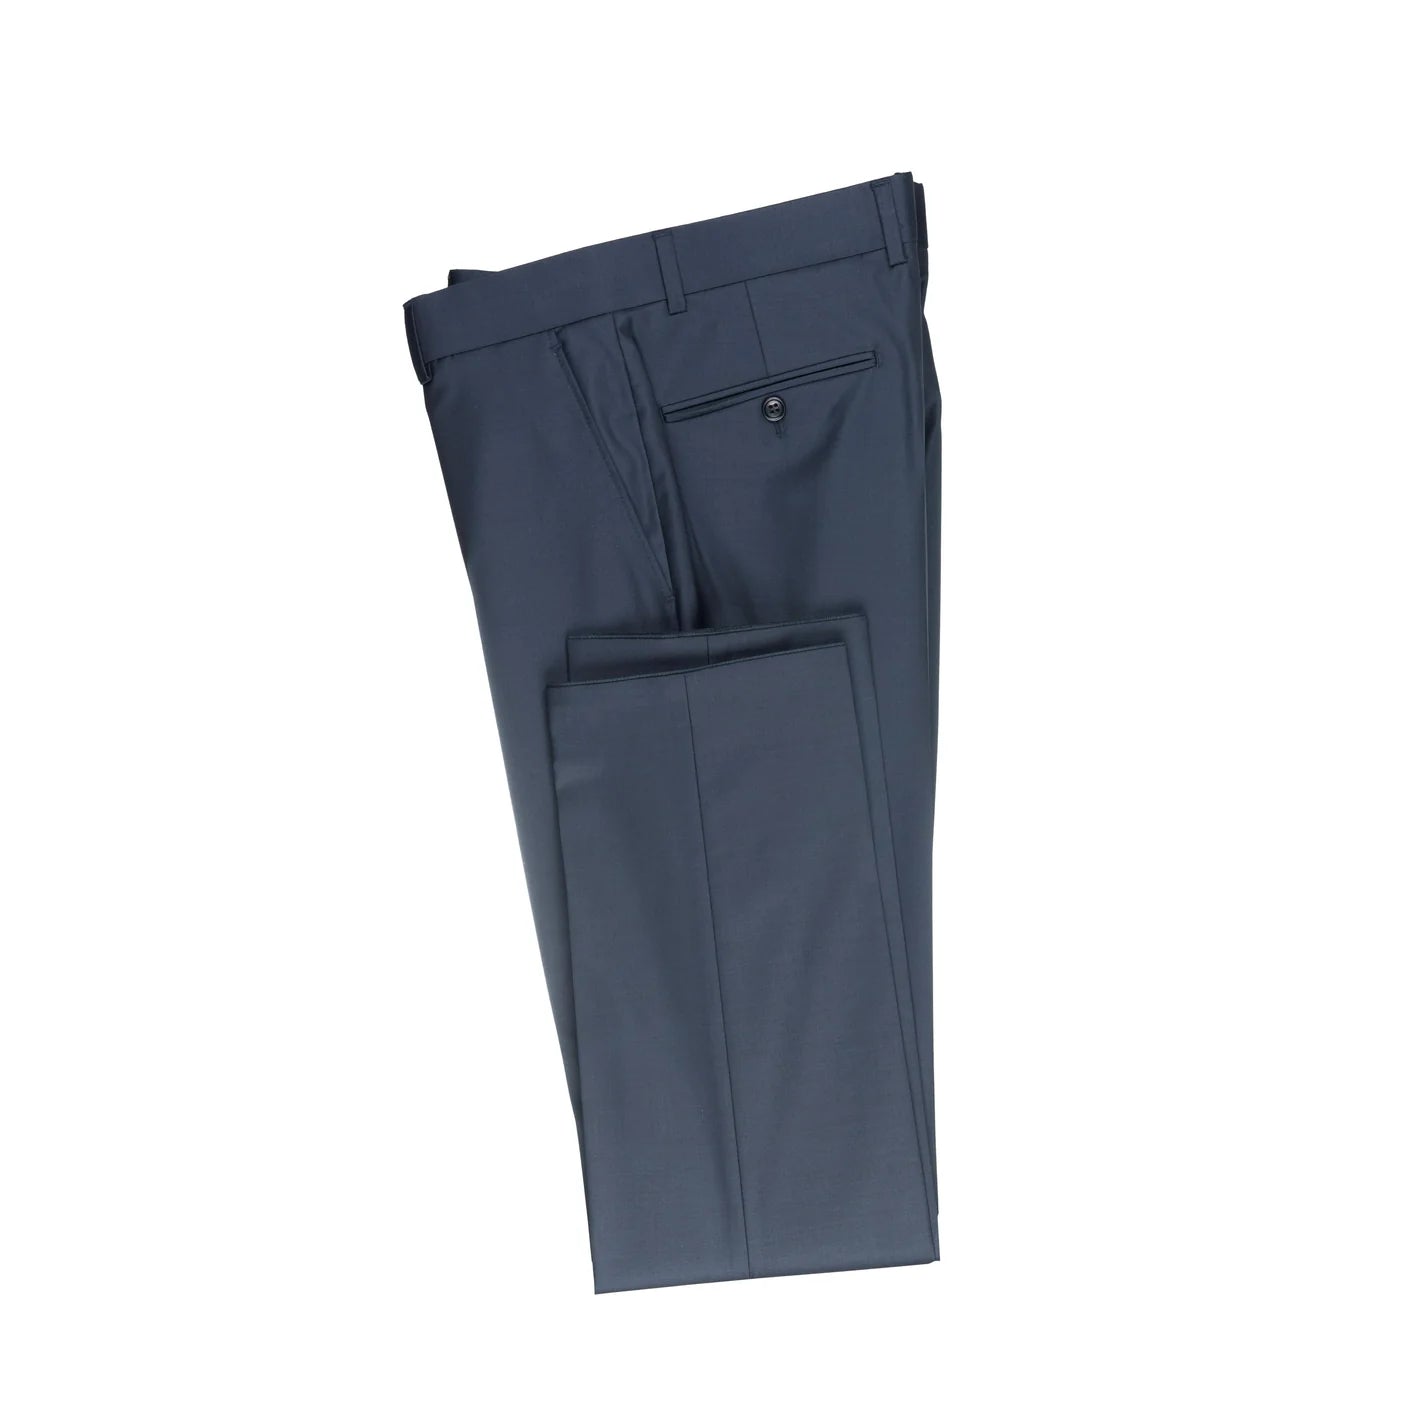 Men's Bagozza Sirio Trousers with Piped back pocket & Slit front pockets in Navy (3219) - available in-store, 337 Monty Naicker Street, Durban CBD or online at Omar's Tailors & Outfitters online store.   A men's fashion curation for South African men - established in 1911.